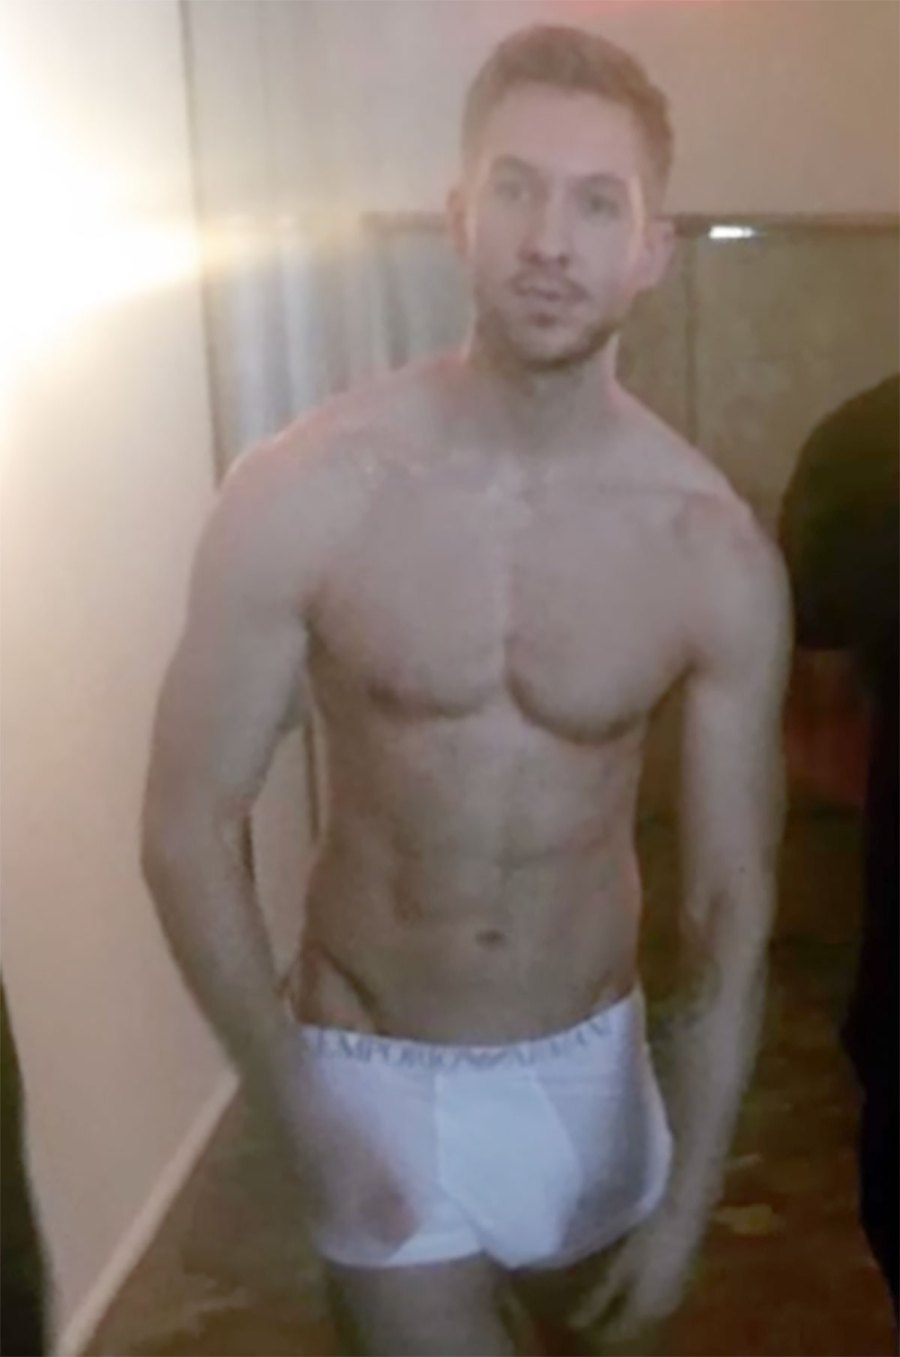 Shirtless Hunks- Hot Celebs and Their Insane Physiques Calvin Harris